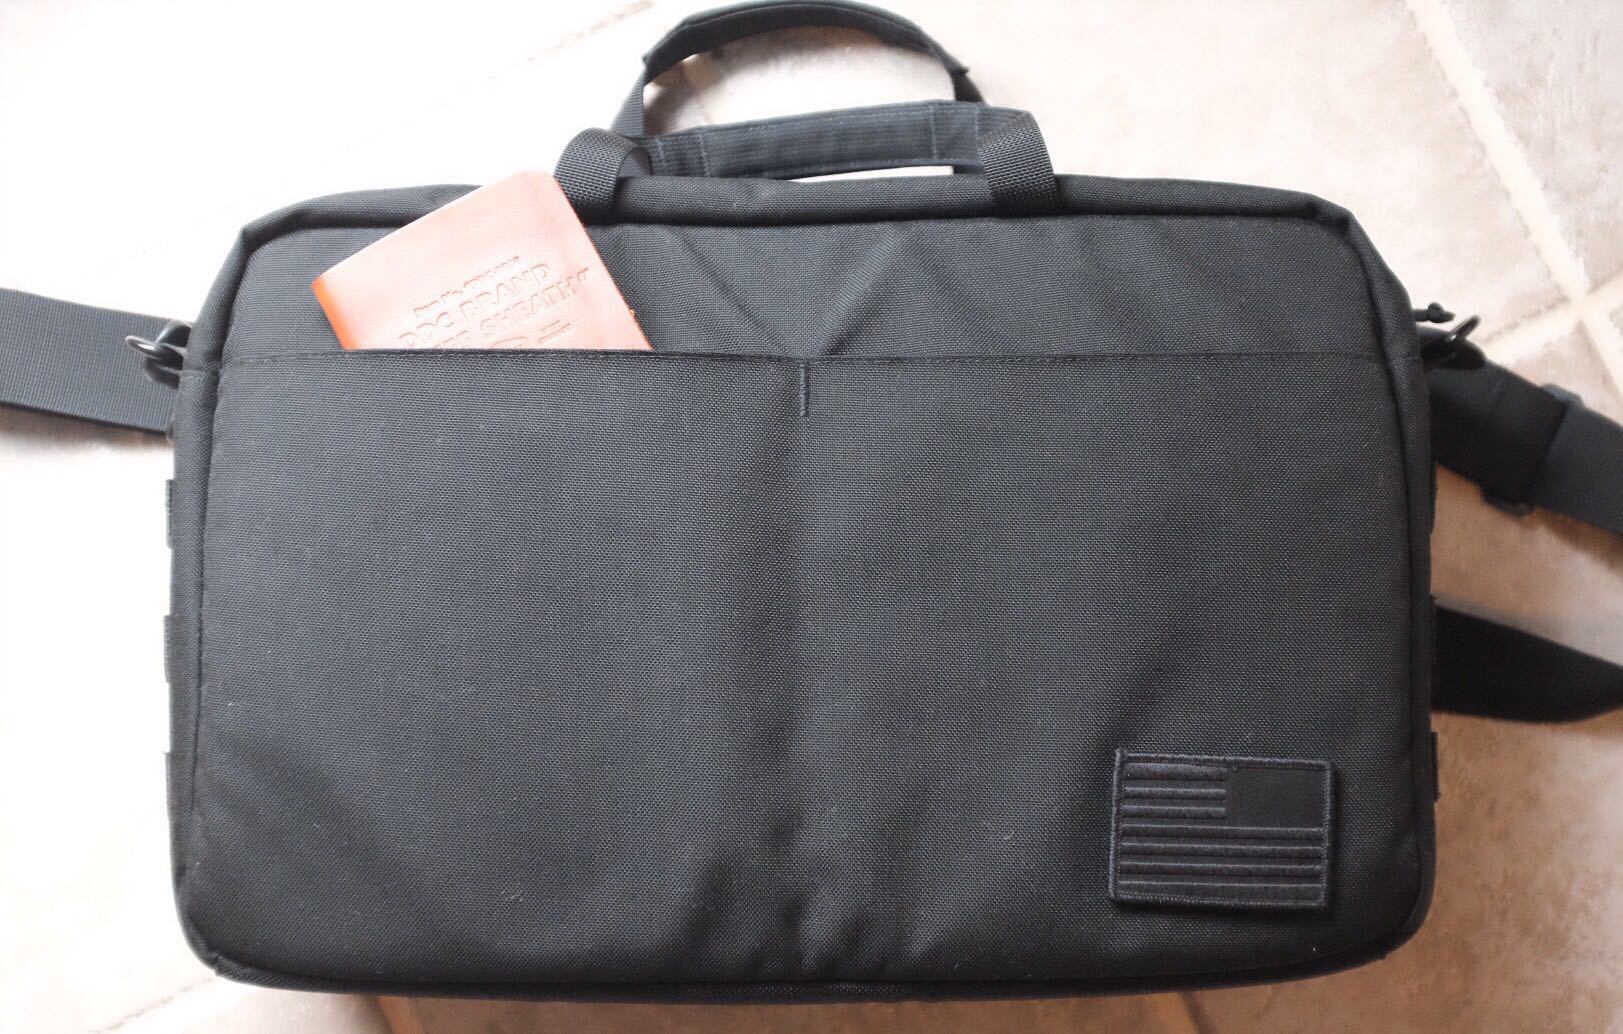 The GORUCK 15L Shoulder Bag – The Brooks Review